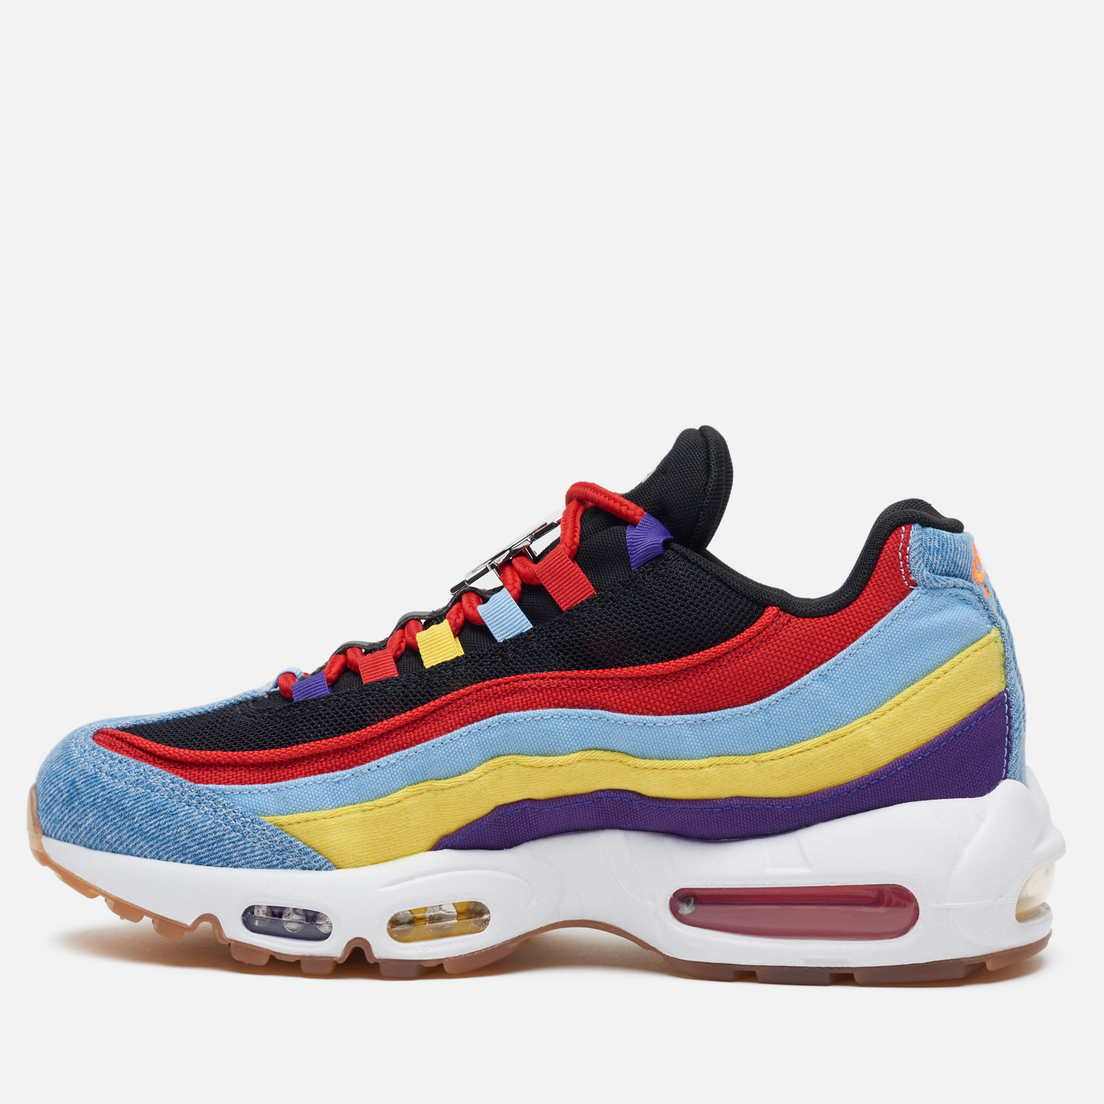 nike air max 95 red yellow blue